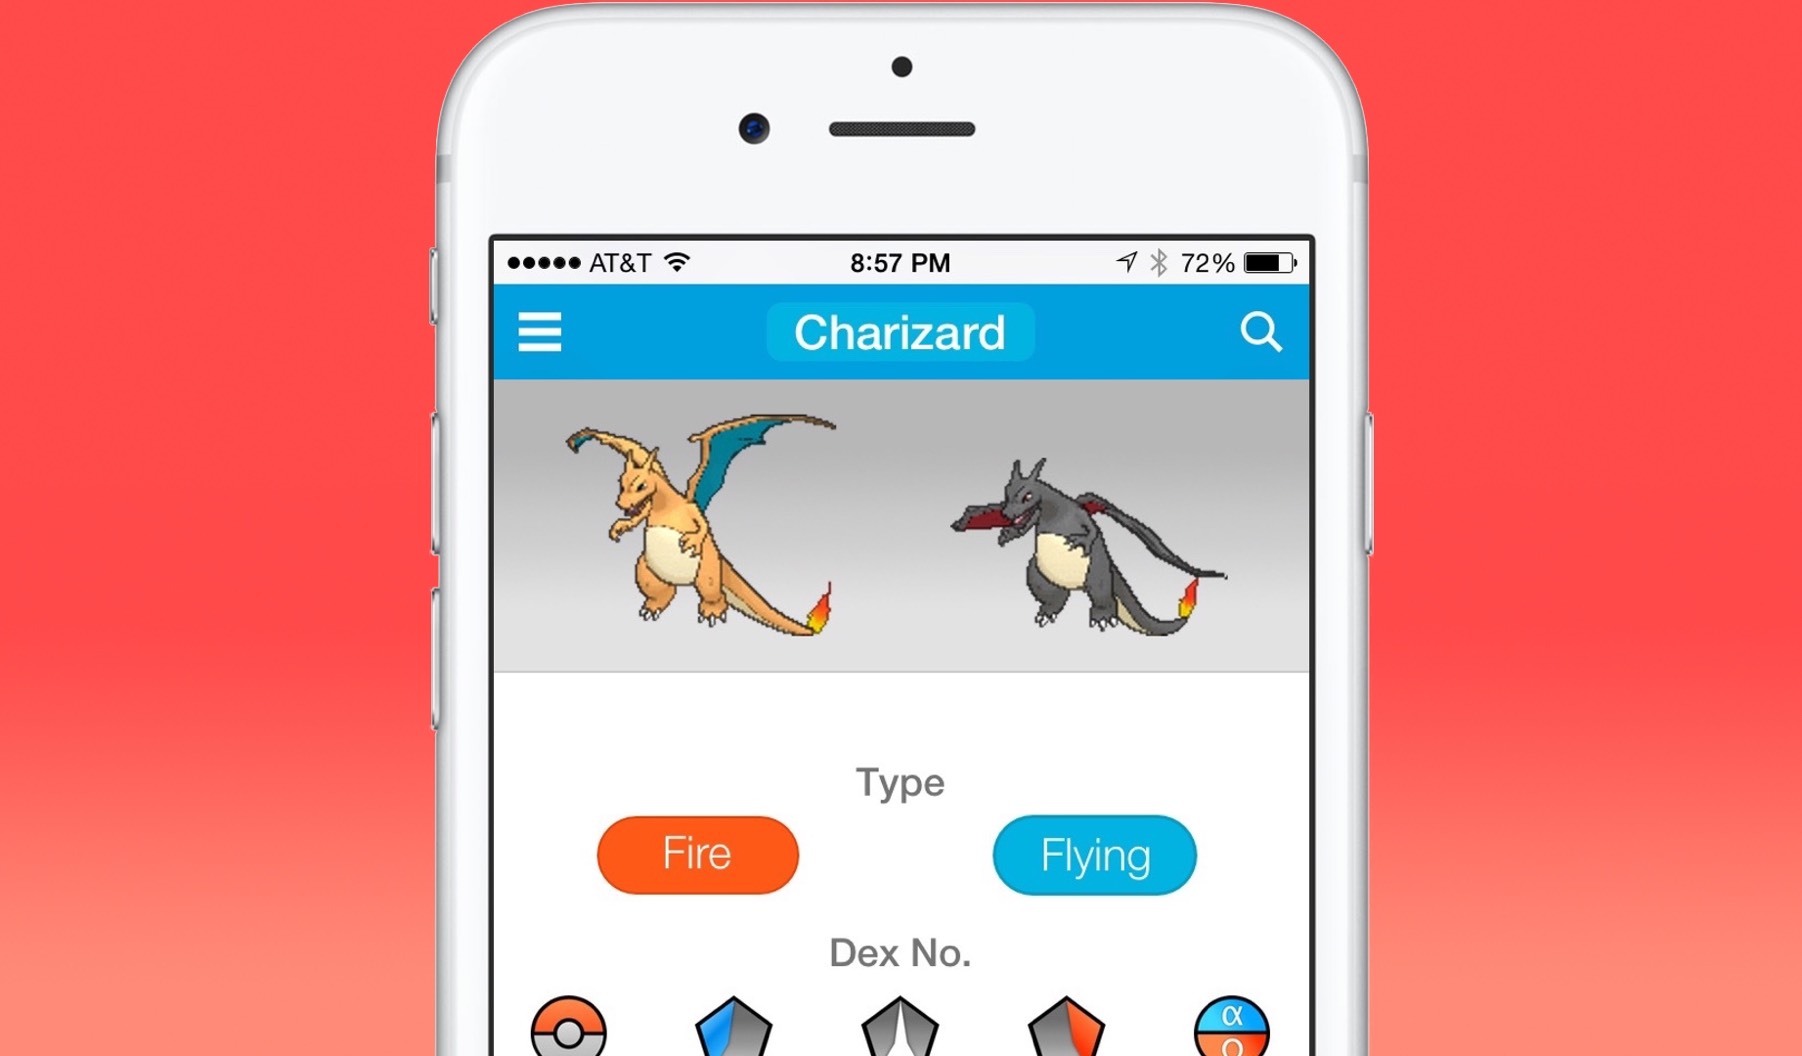 Screenshot of an app showing various stats and images of a Pokémon